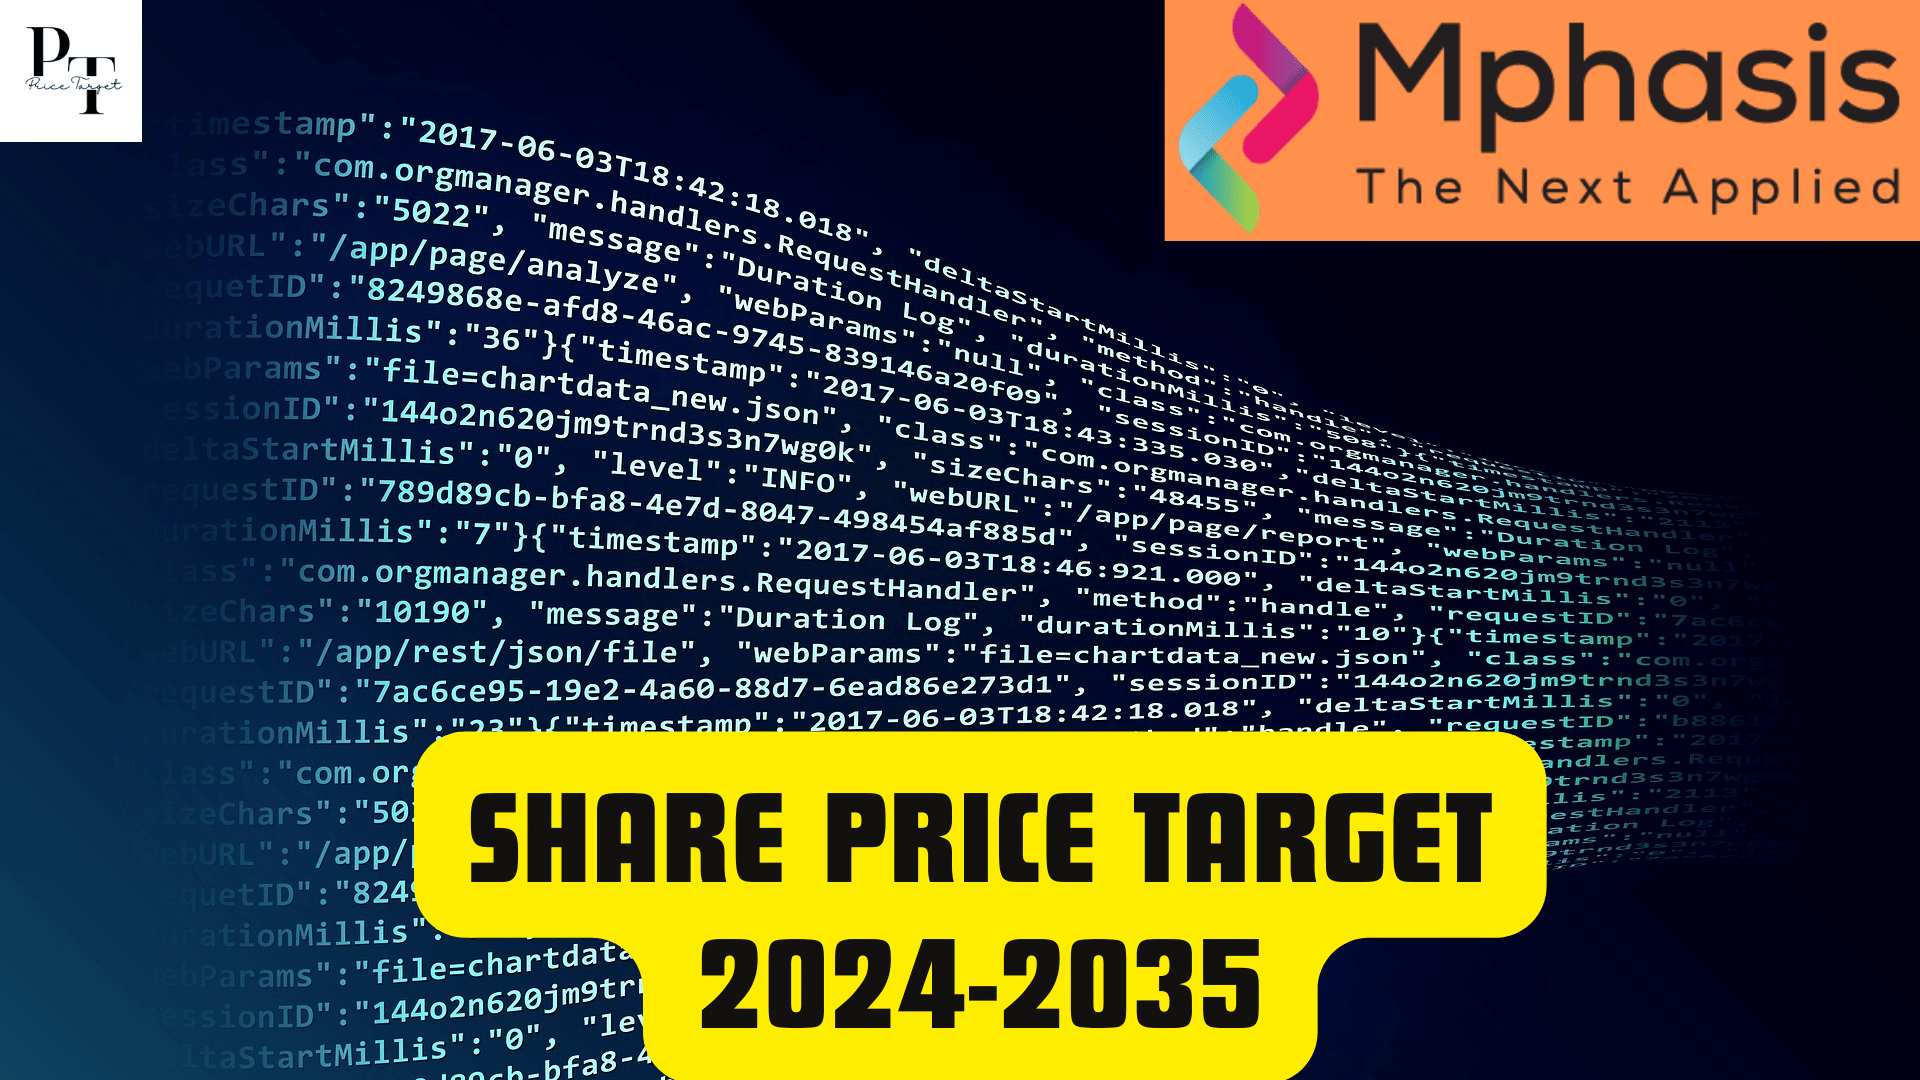 Mphasis Share Price Target